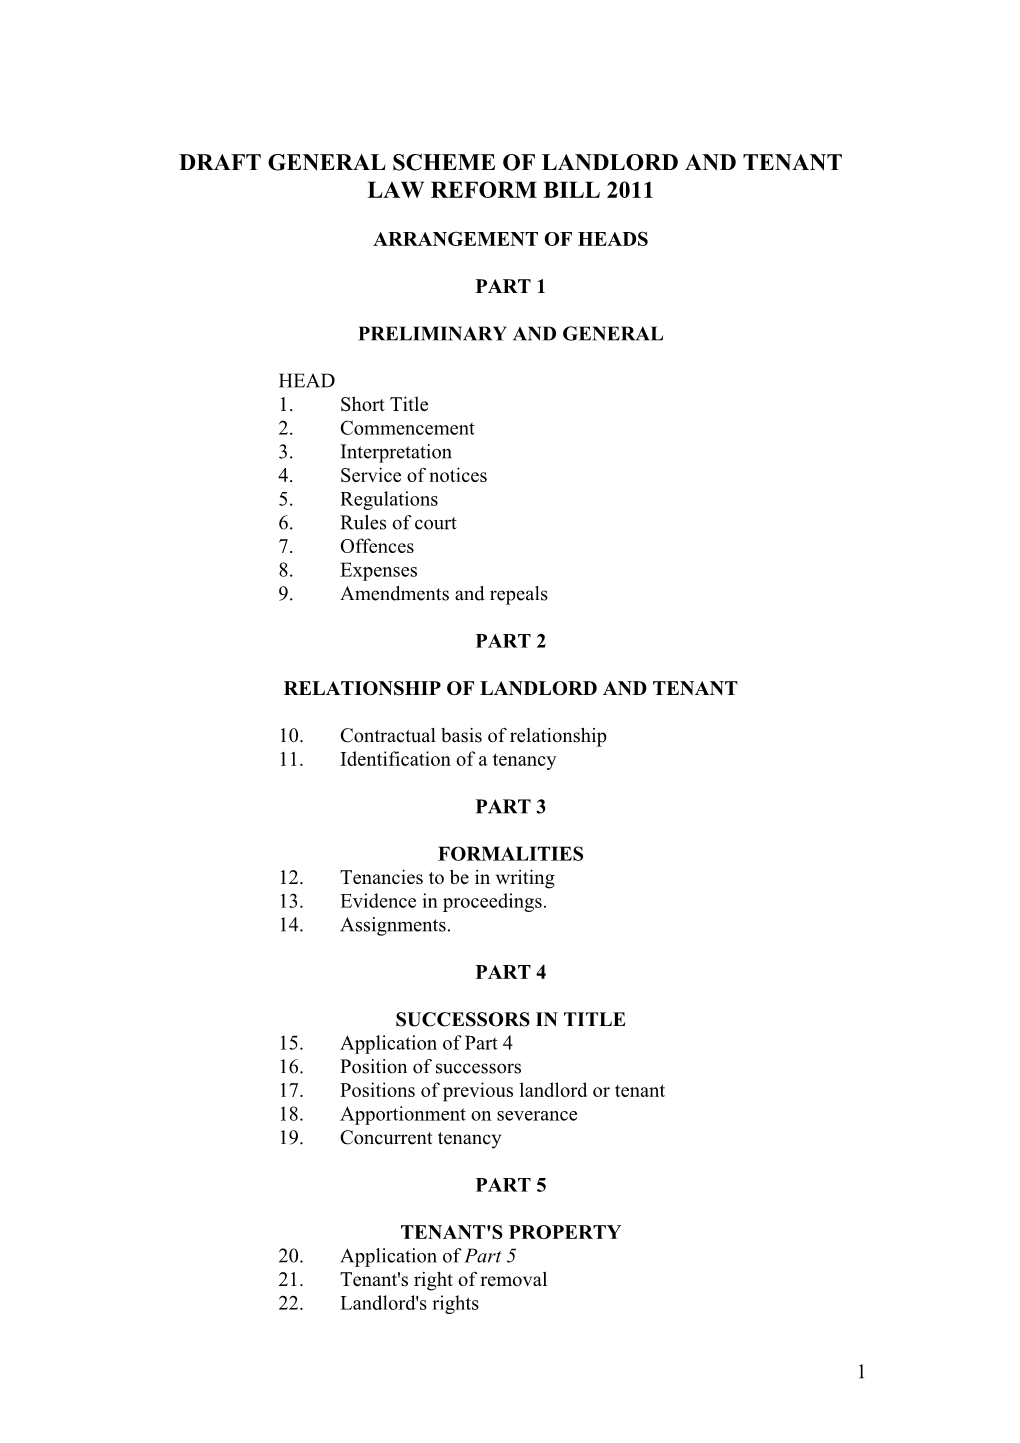 Draft General Scheme of Landlord and Tenant Law Reform Bill 2011